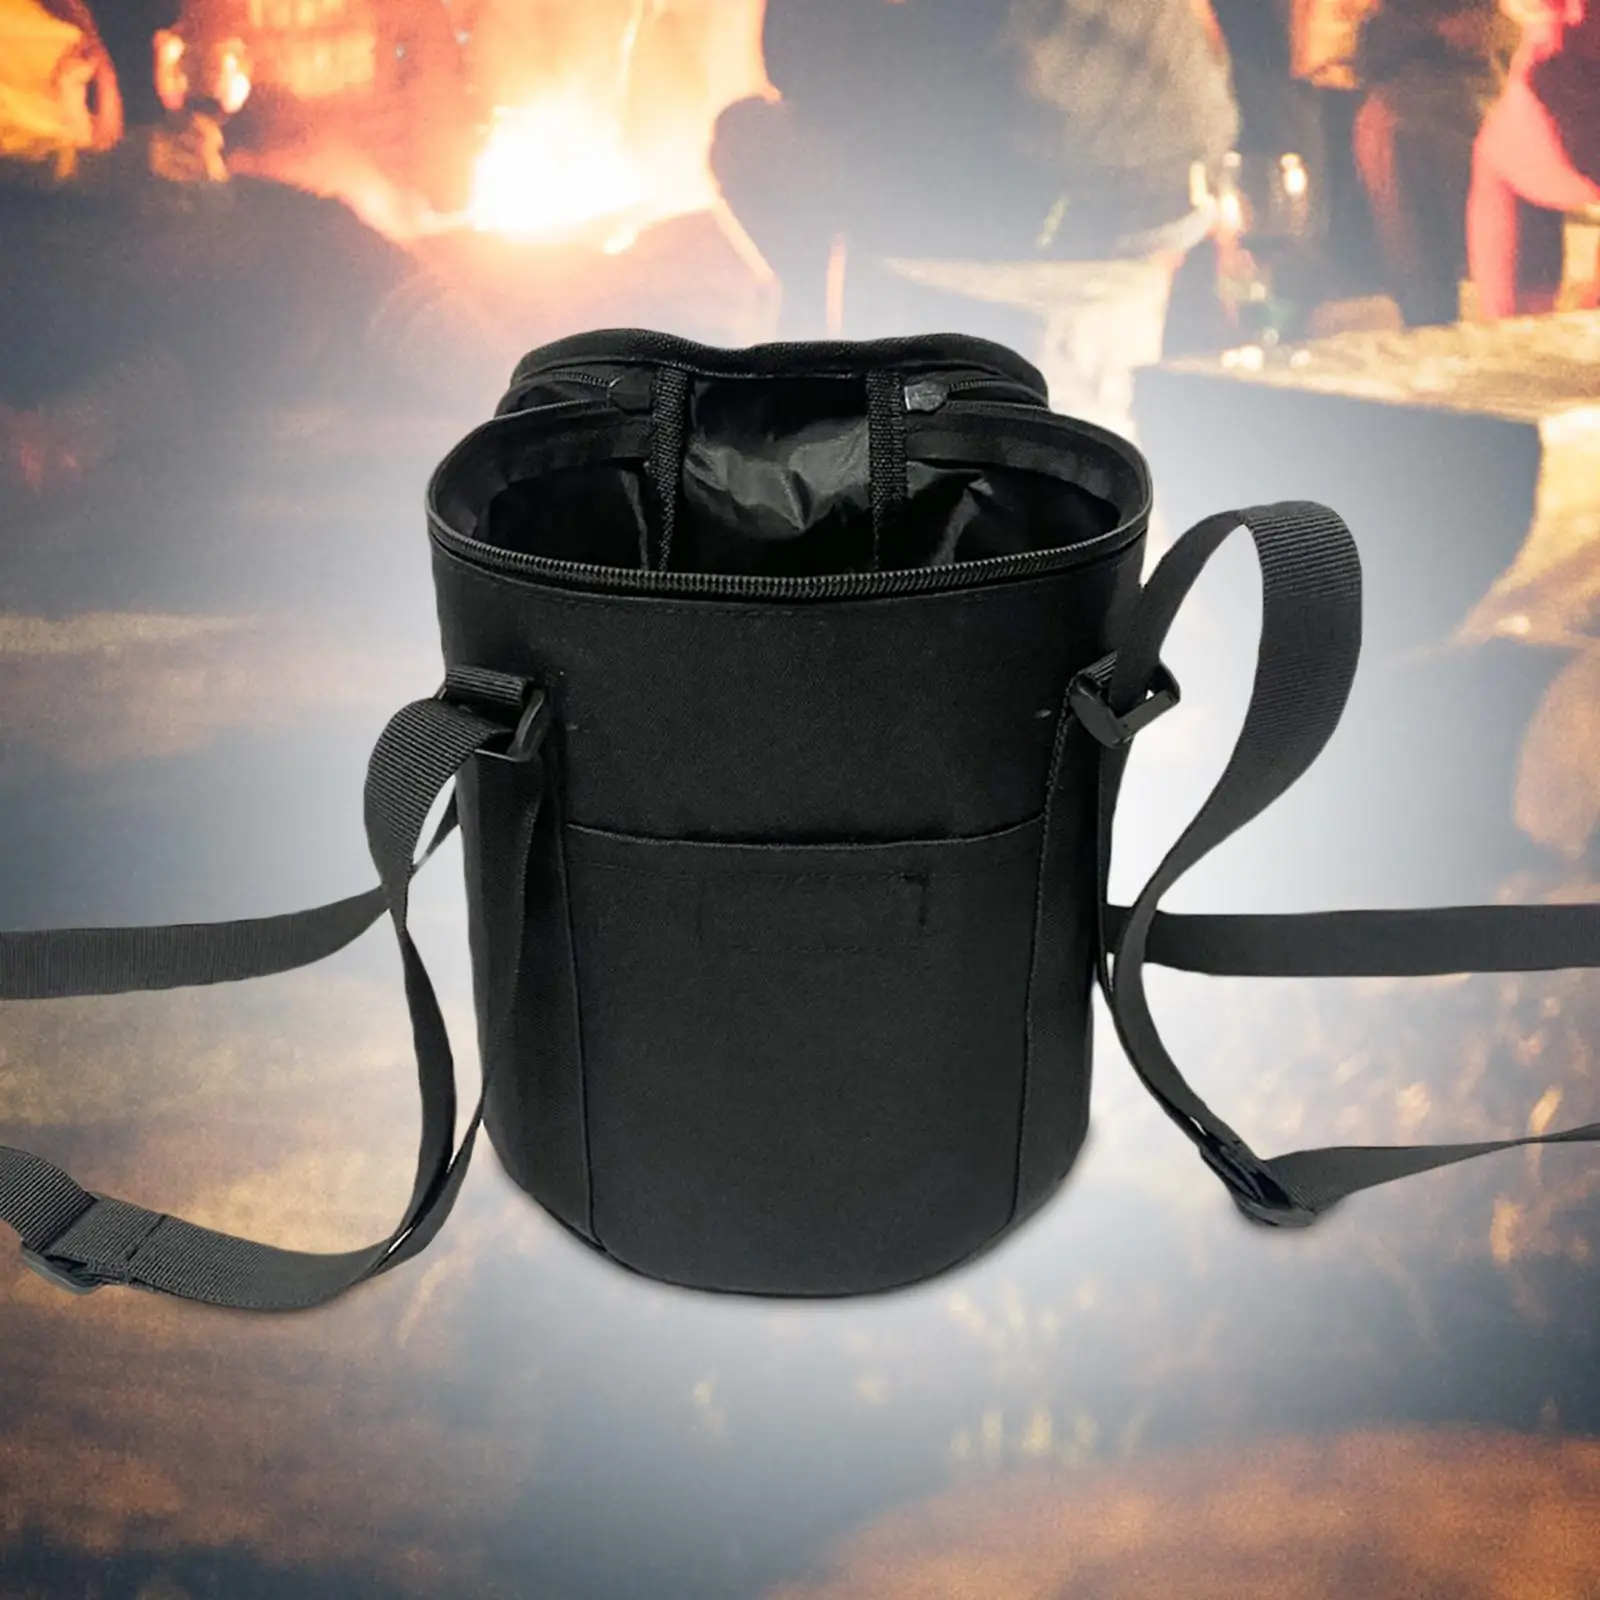 Tabletop Fire Pit Bag Durable Fire Bowl Carry Bag for Travel Picnic Outdoor